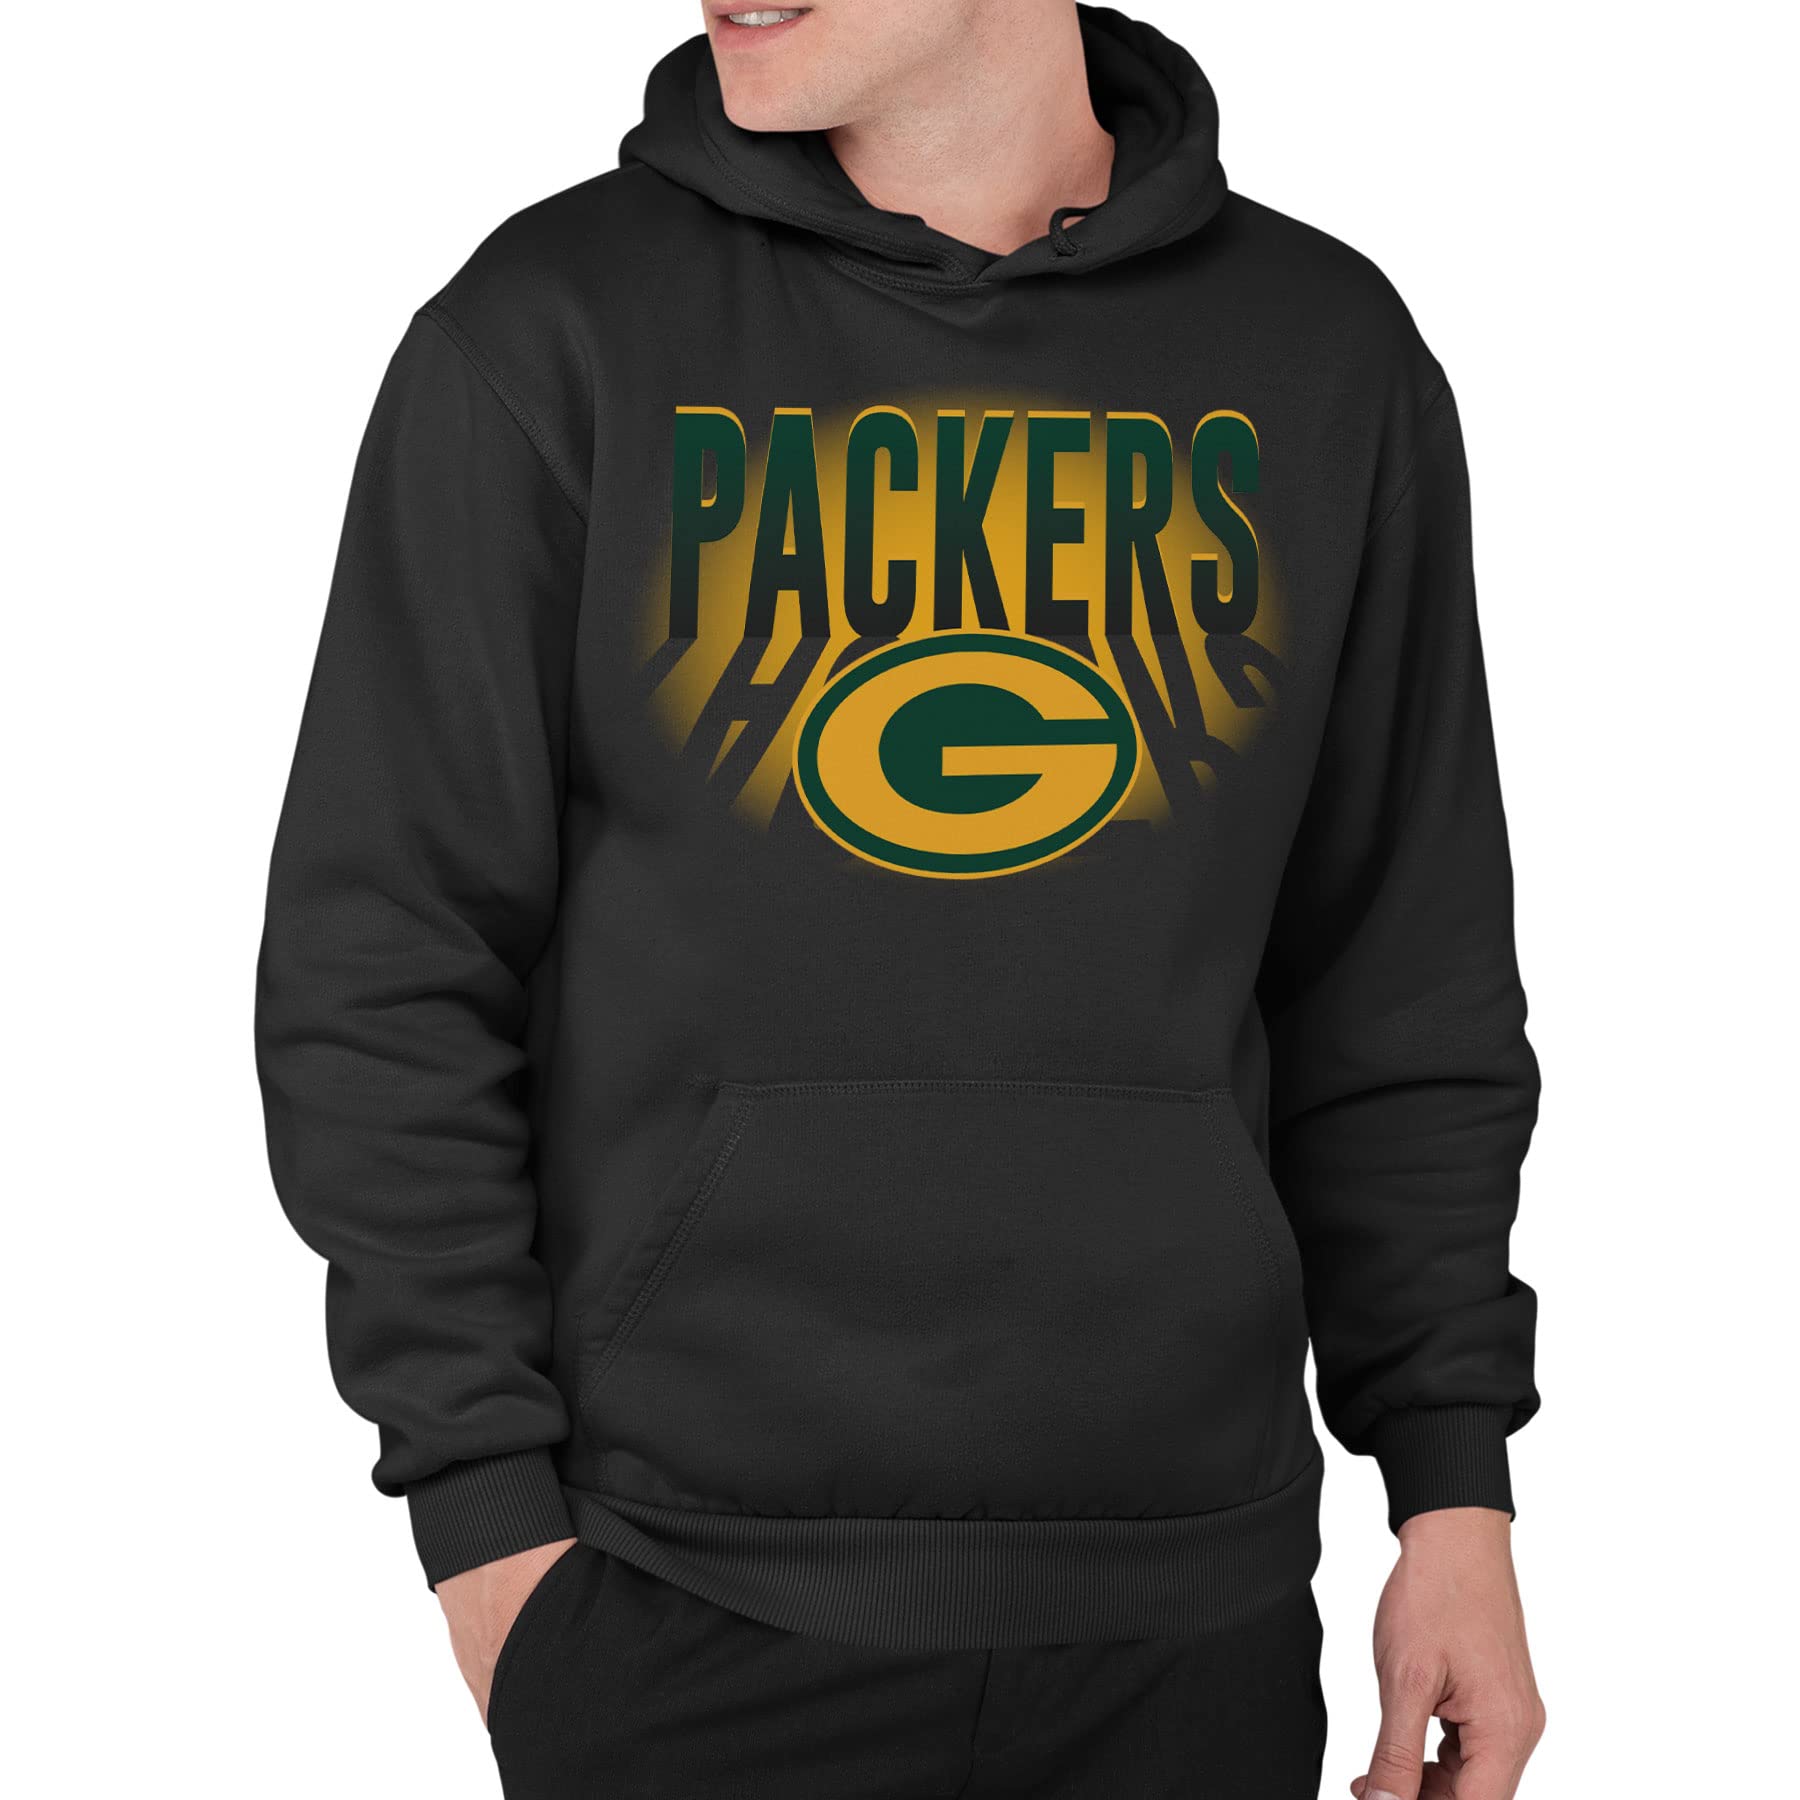 Junk Food clothing x NFL - green Bay Packers - Team Spotlight - Adult  Pullover Hooded Sweatshirt for Men and Women - Size 3 X-La